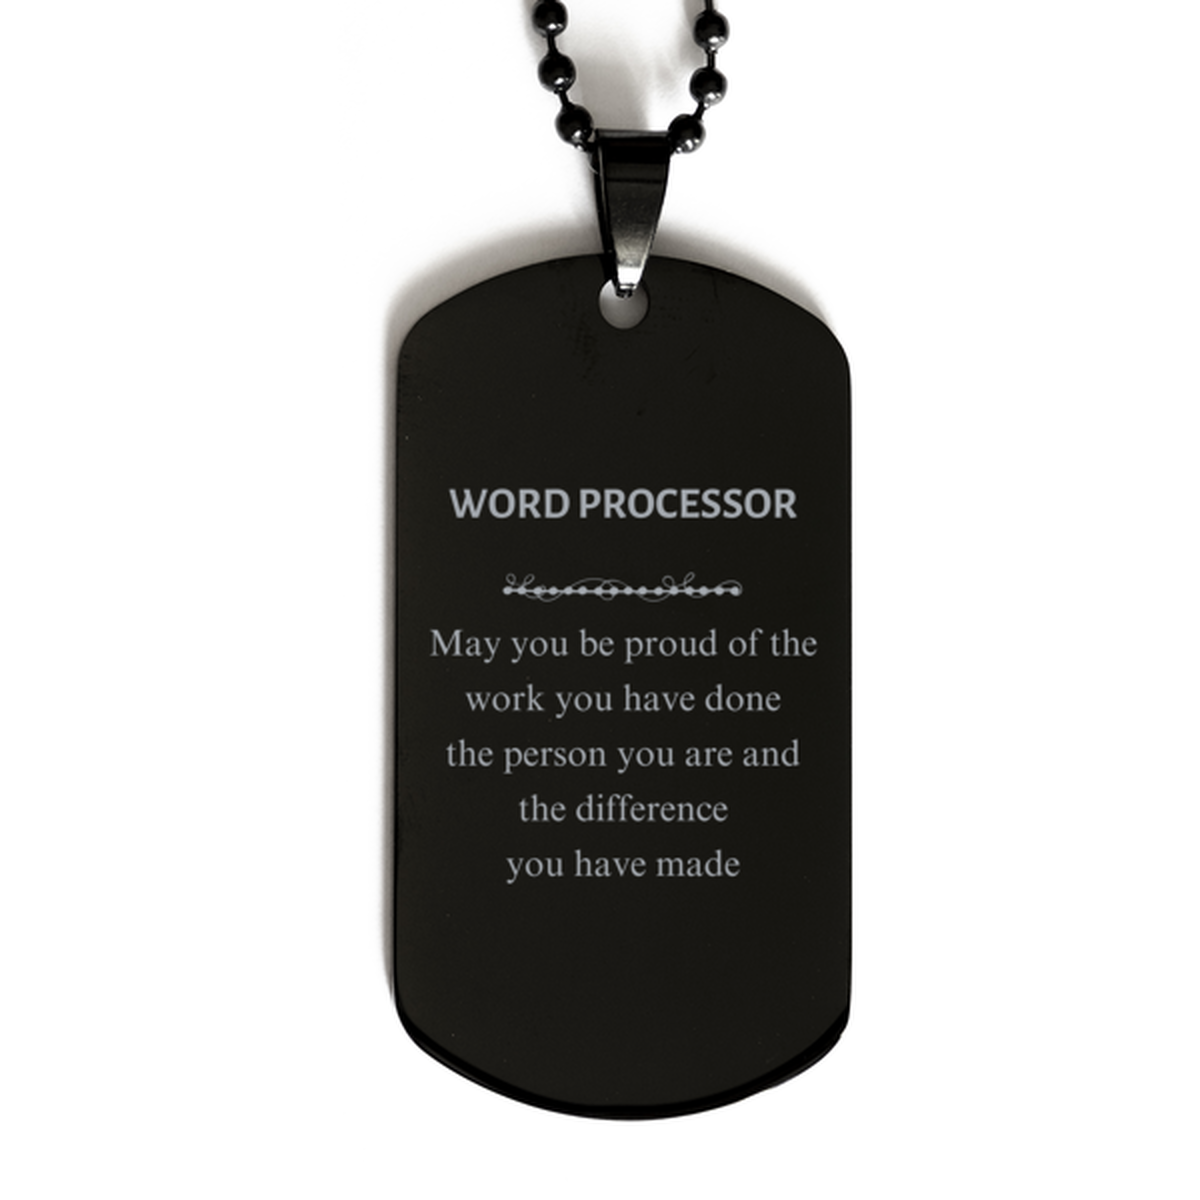 Word Processor May you be proud of the work you have done, Retirement Word Processor Black Dog Tag for Colleague Appreciation Gifts Amazing for Word Processor